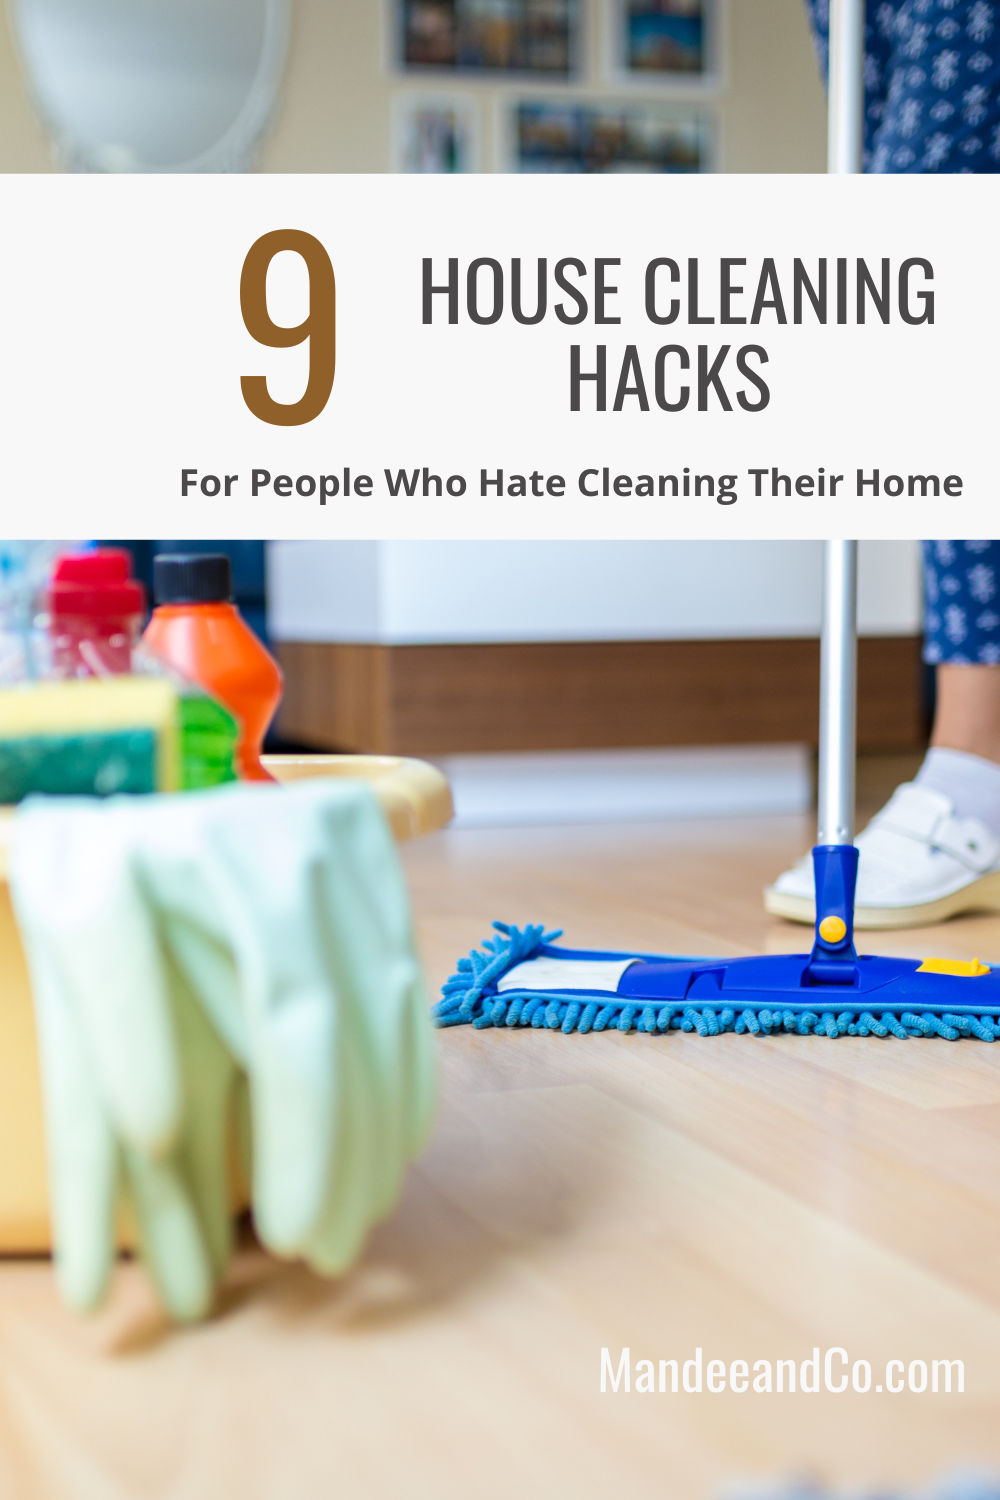 House Cleaning Hacks For People Who Hate Cleaning Their Home